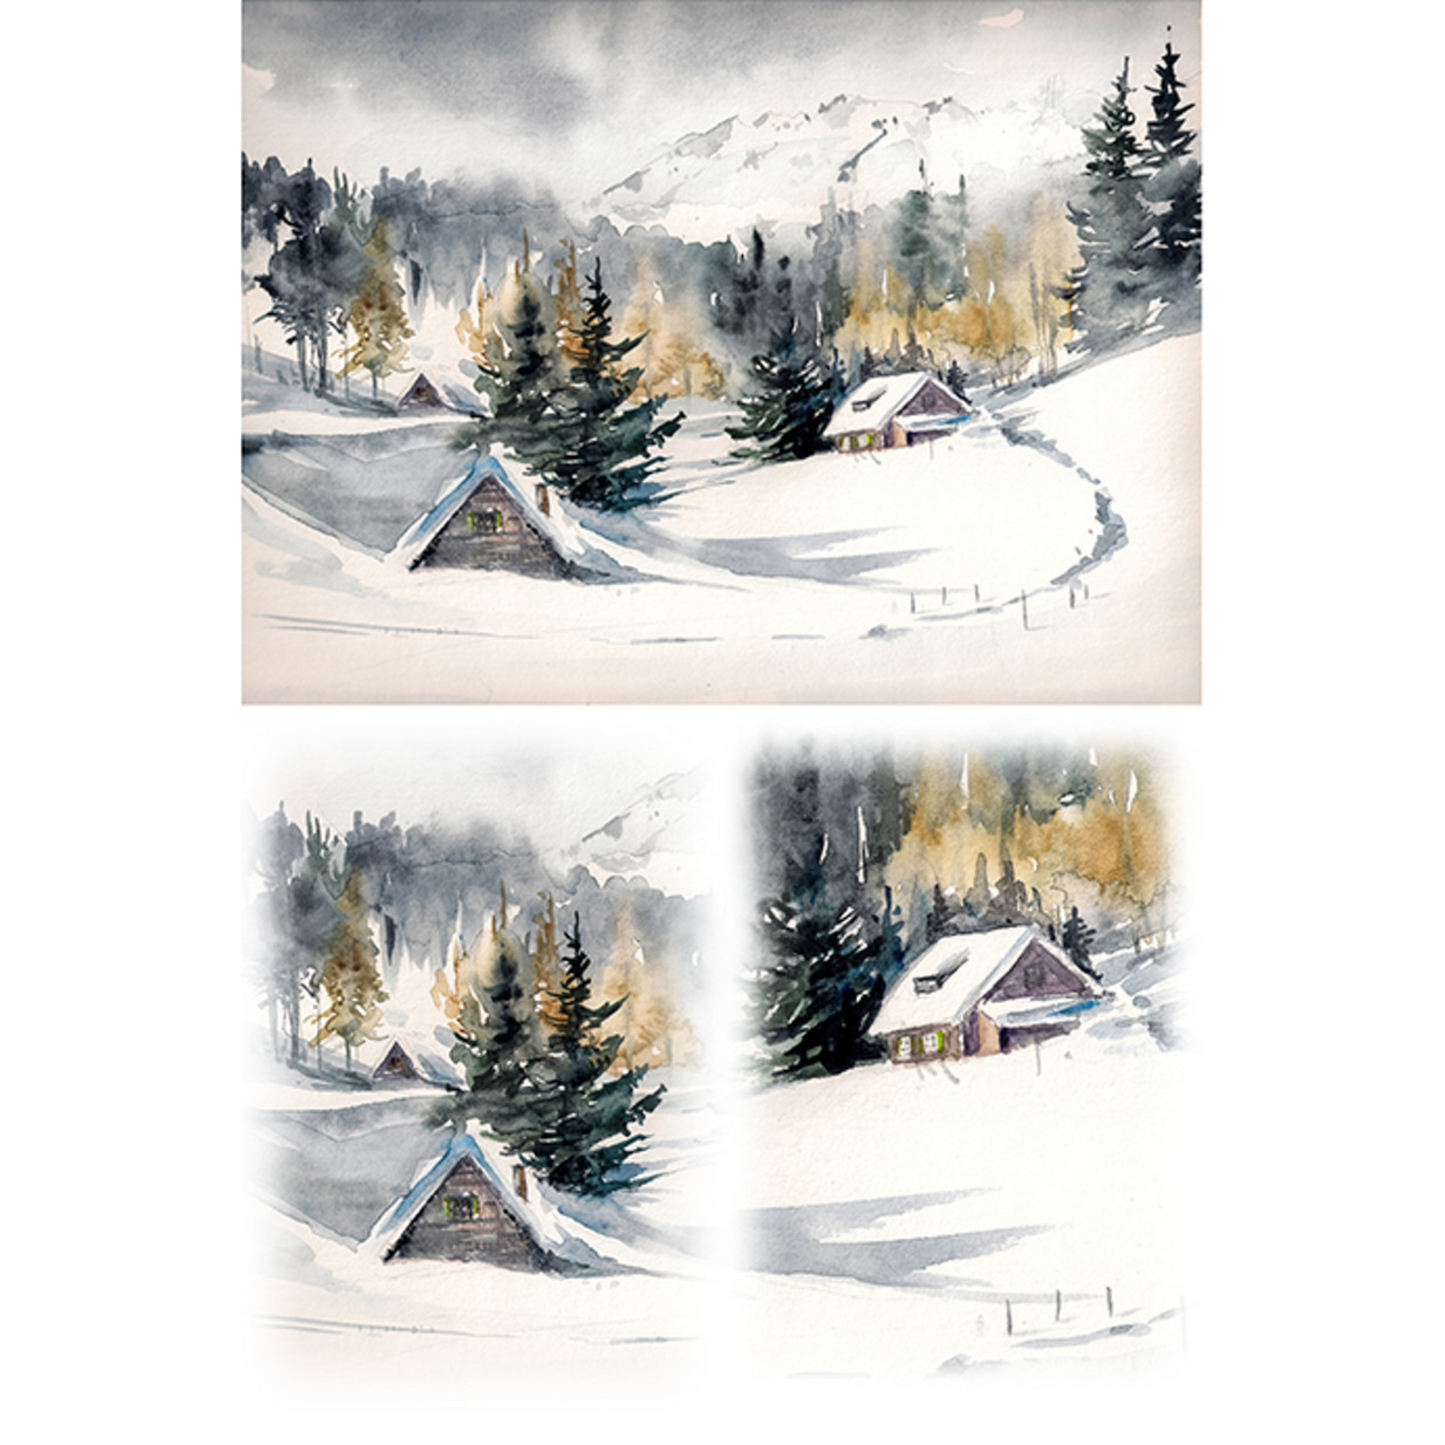  "Snowy Landscape Scene" decoupage rice paper by Paper Designs. Available at Milton's Daughter.